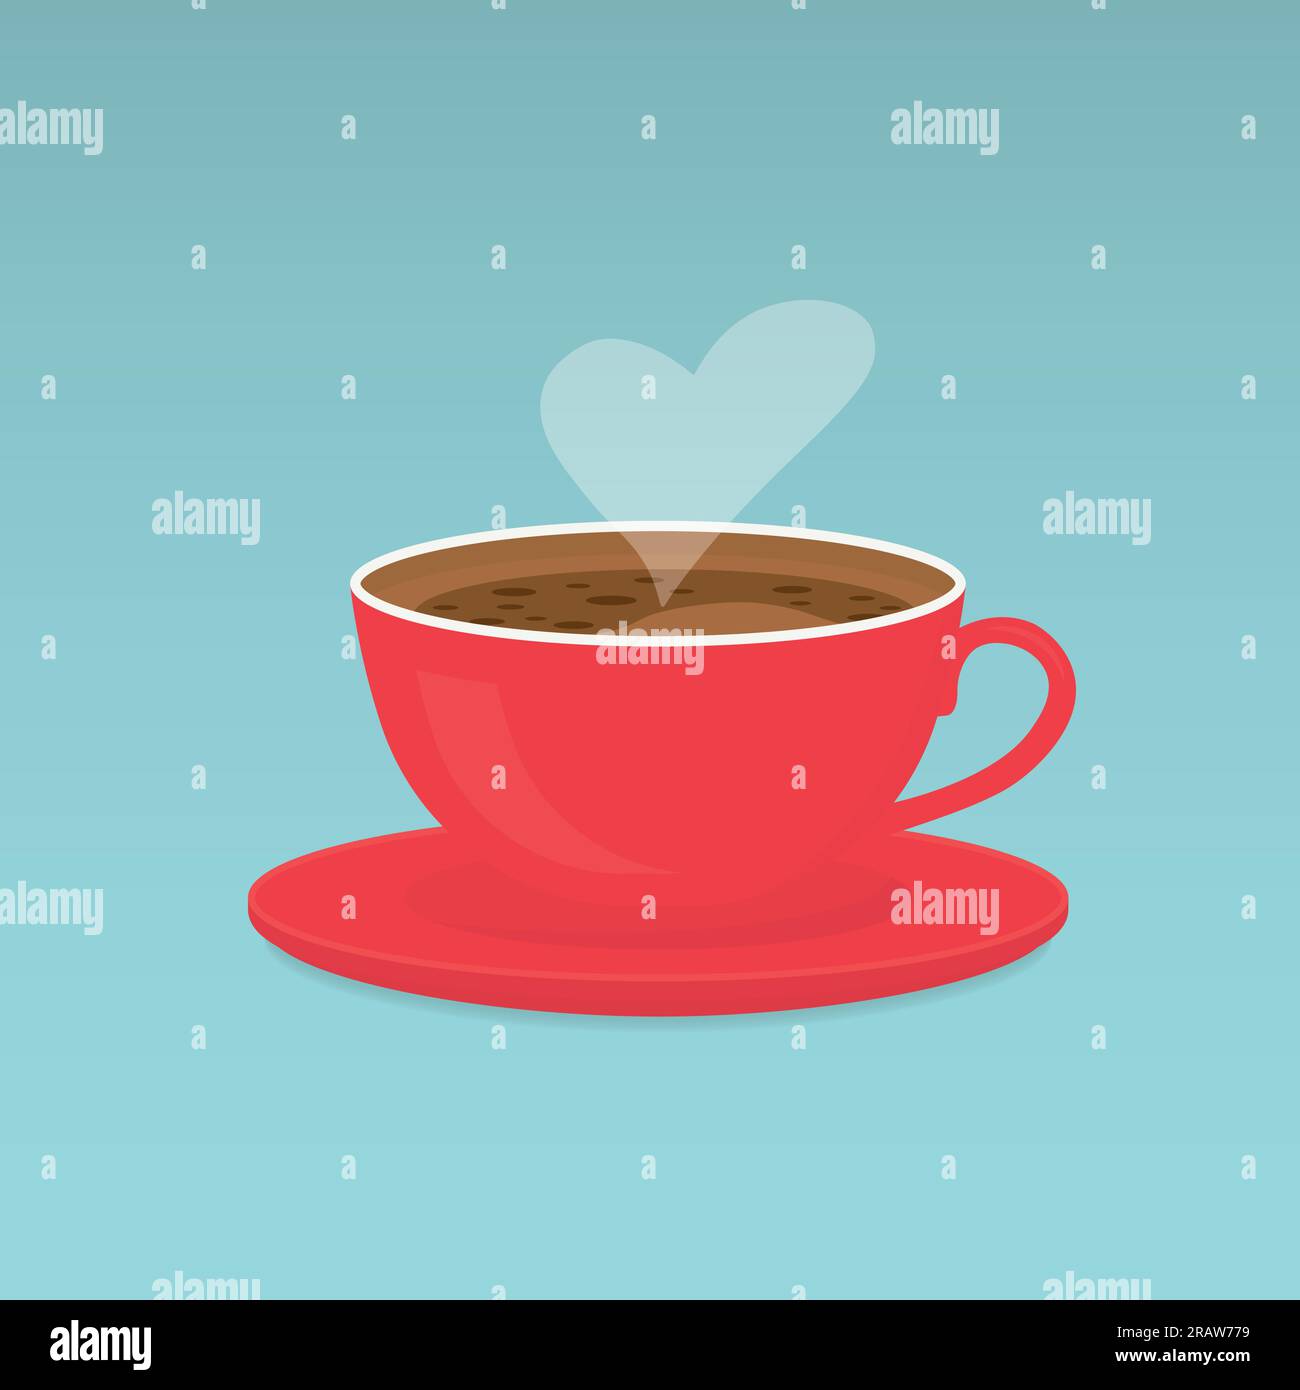 https://c8.alamy.com/comp/2RAW779/hot-coffee-cup-with-heart-shaped-steam-vector-illustration-2RAW779.jpg